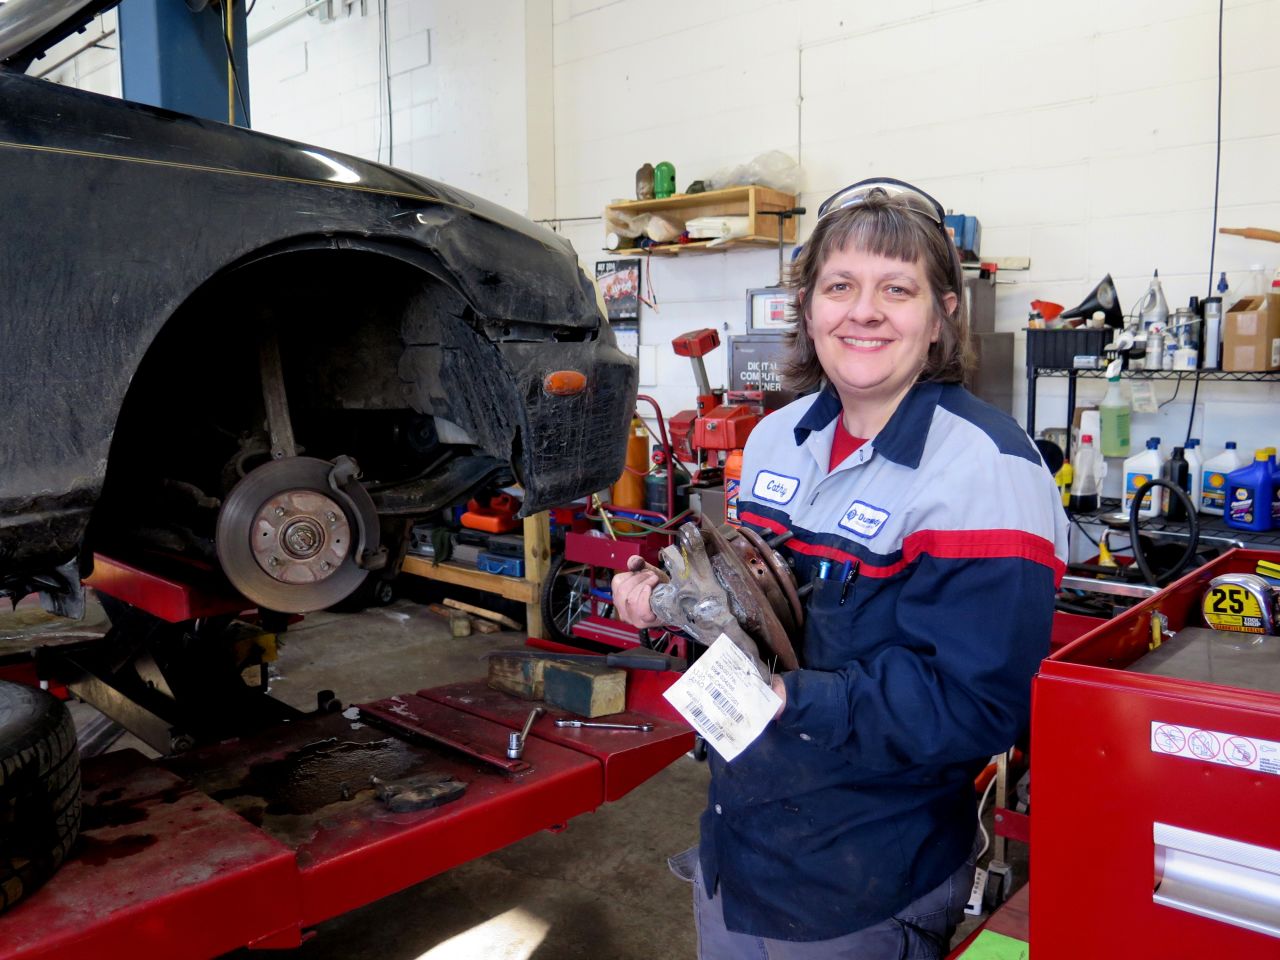 All of the 2015 CNN Heroes show how one person can truly make a difference. <a href="http://www.cnn.com/2015/03/12/living/cnnheroes-heying/index.html" target="_blank">Cathy Heying</a> helps the needy repair their vehicles at low cost so they can continue on the road to success. Heying has provided affordable car repairs to hundreds of low-income individuals, saving them a total of over $170,000. Click through the gallery to meet more 2015 CNN Heroes.